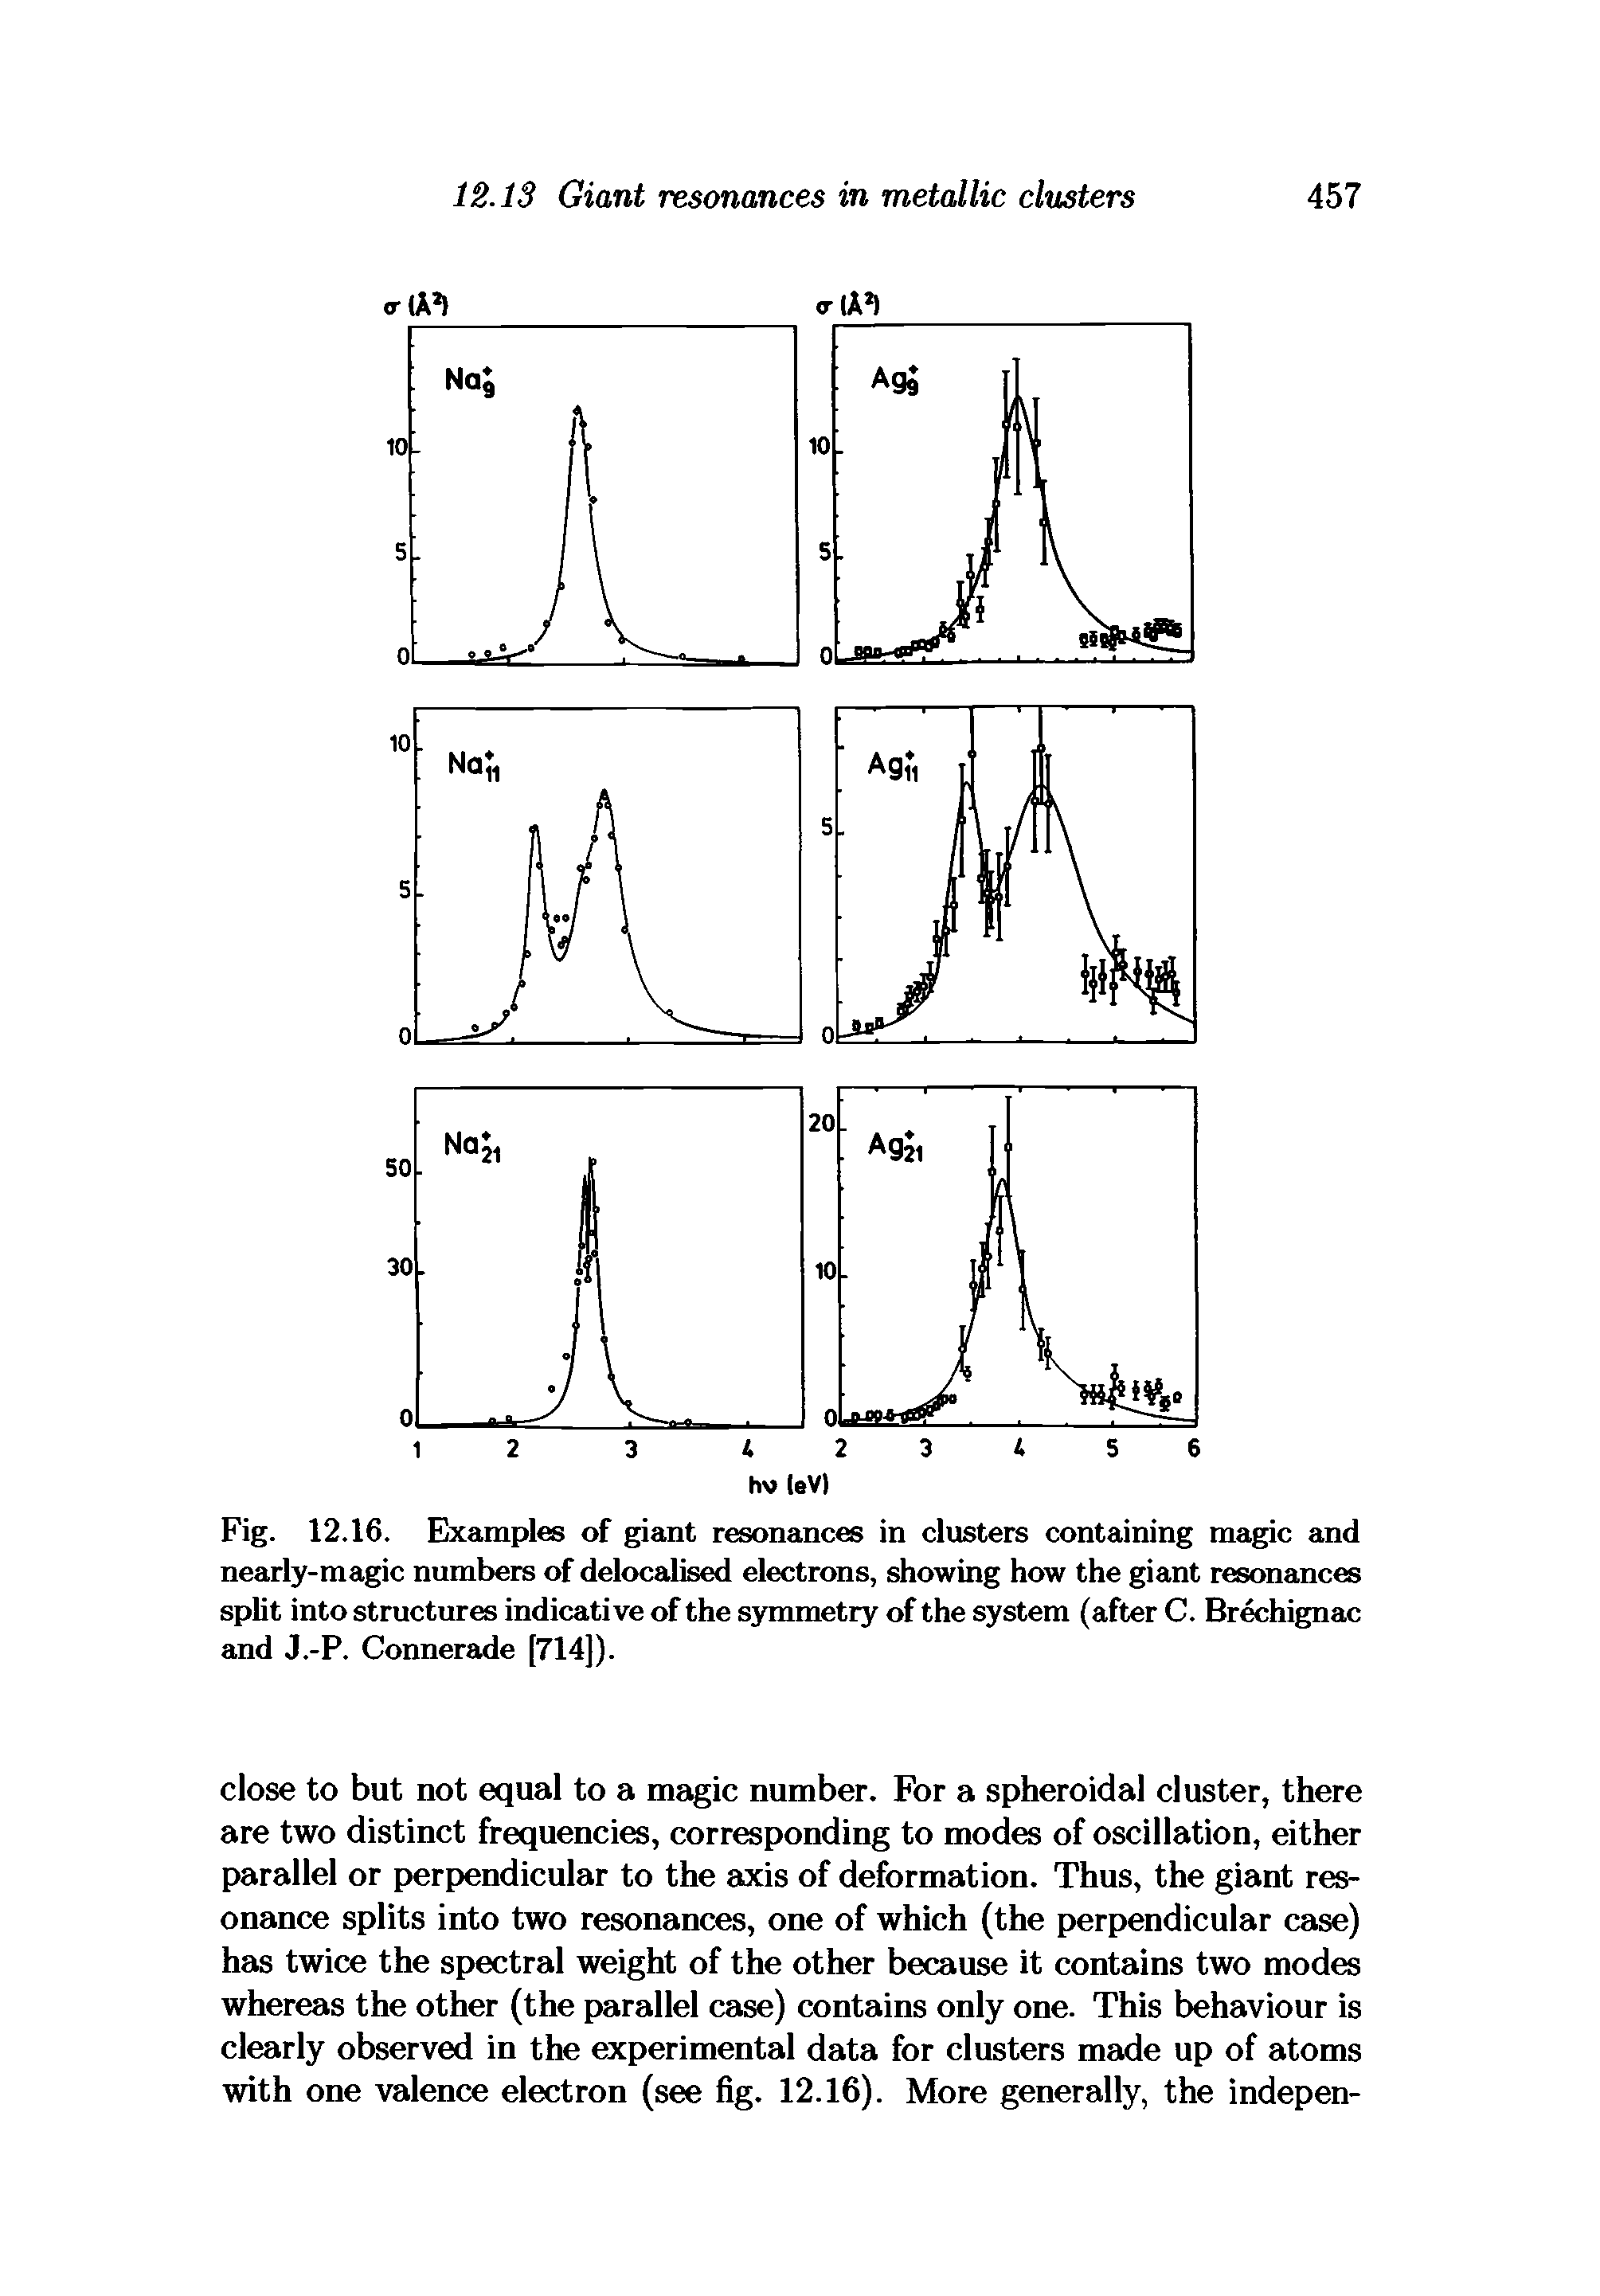 Fig. 12.16. Examples of giant resonances in clusters containing magic and nearly-magic numbers of delocalised electrons, showing how the giant resonances split into structures indicative of the symmetry of the system (after C. Brechignac and J.-P. Connerade [714]).